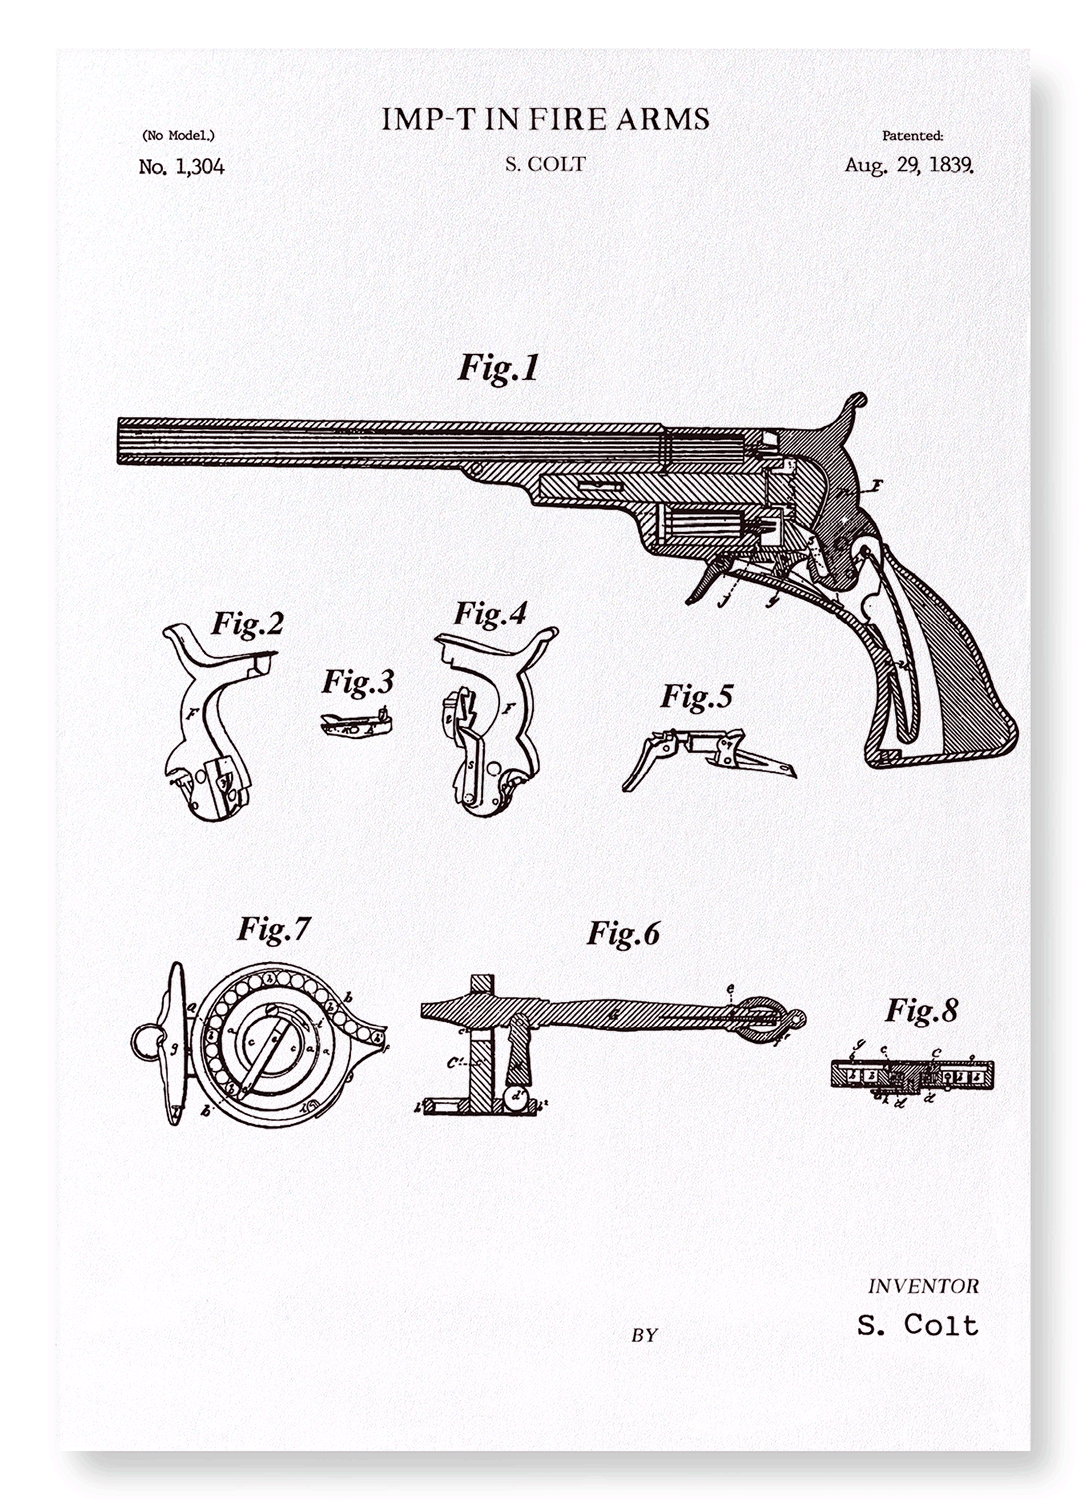 PATENT OF IMP-T IN FIRE ARMS (1839)